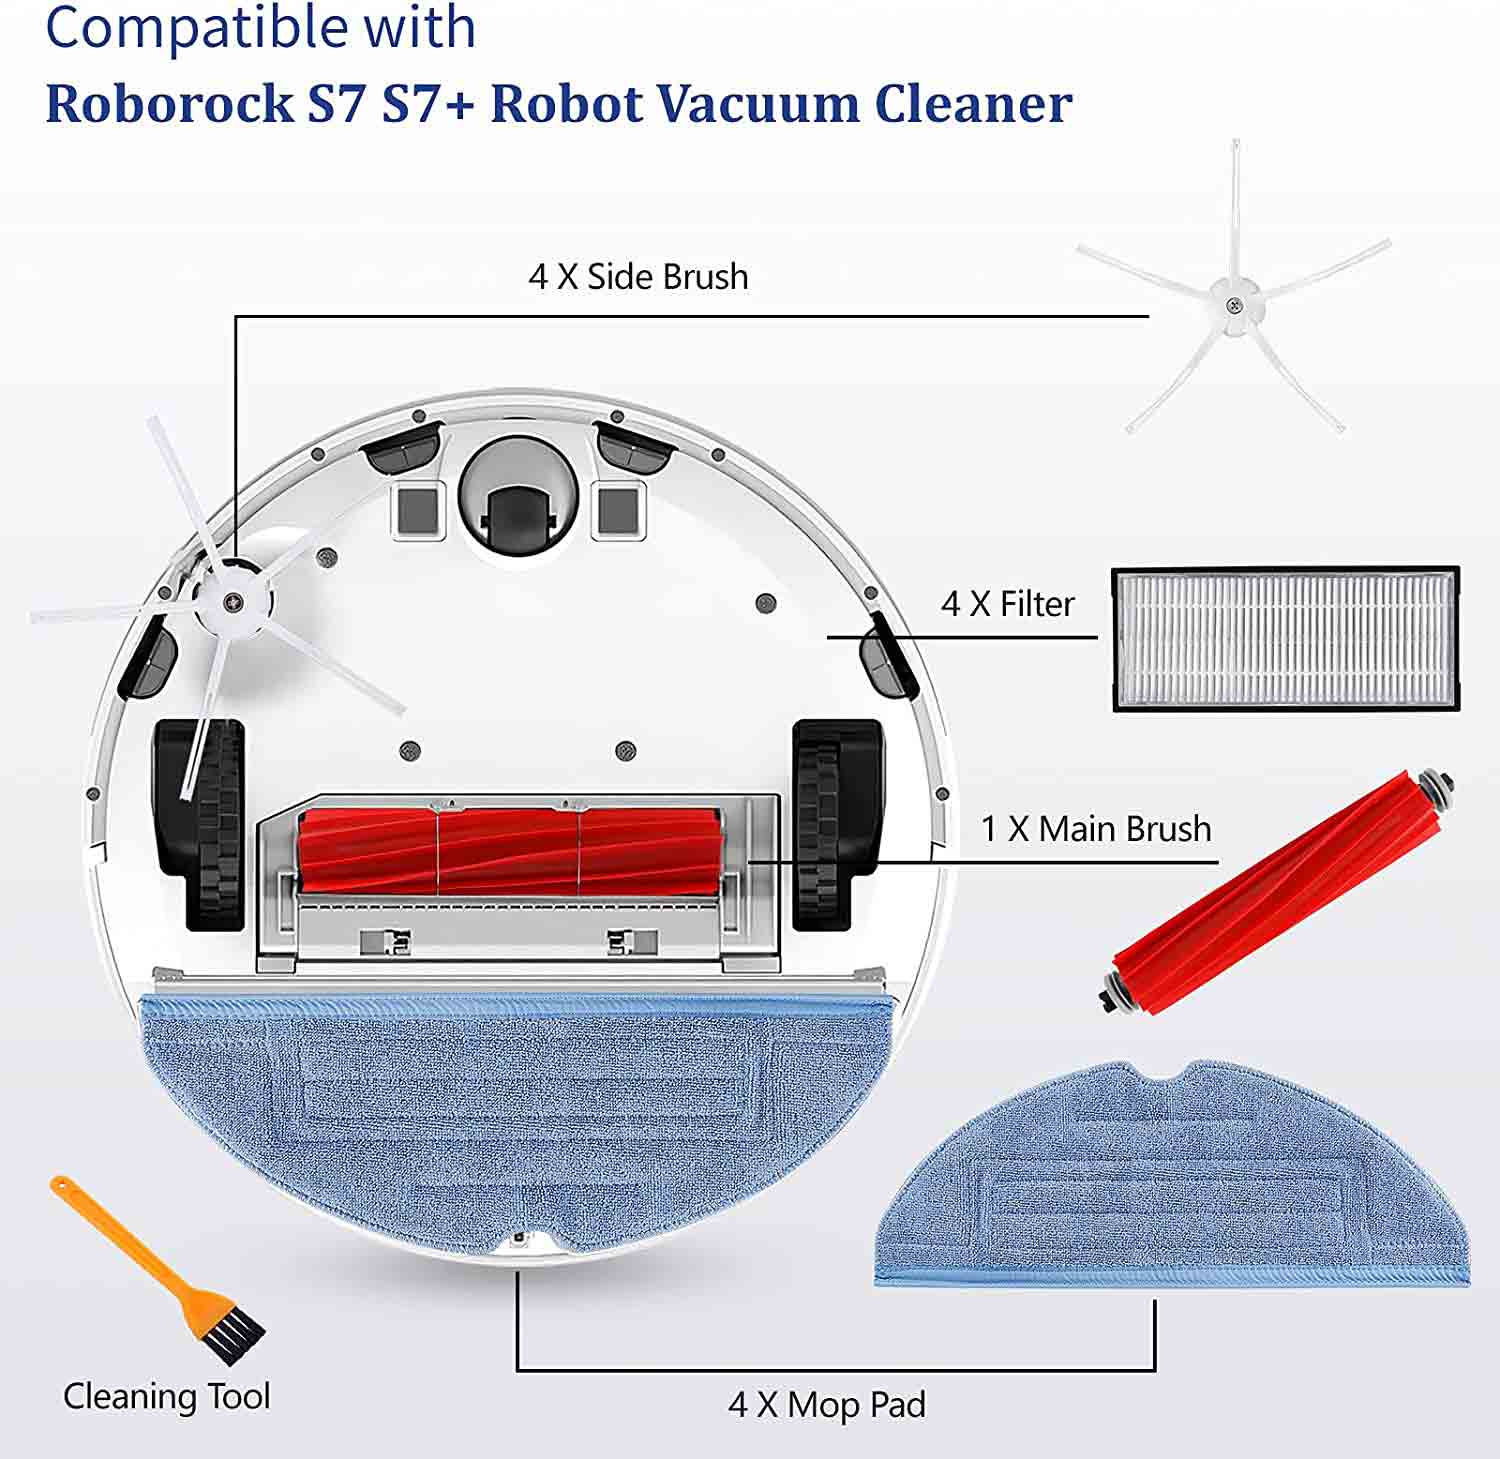 KEEPOW Replacement Parts for Xiaomi Roborock S7 S7+ , Accessories Kit for Roborock S7 S7+ S7 MaxV T7 plus T7S plus Robot Vacuum Cleaner, 4 Side Brush, 4 Filter, 1 Roller Brush, 4 Mop Cloth